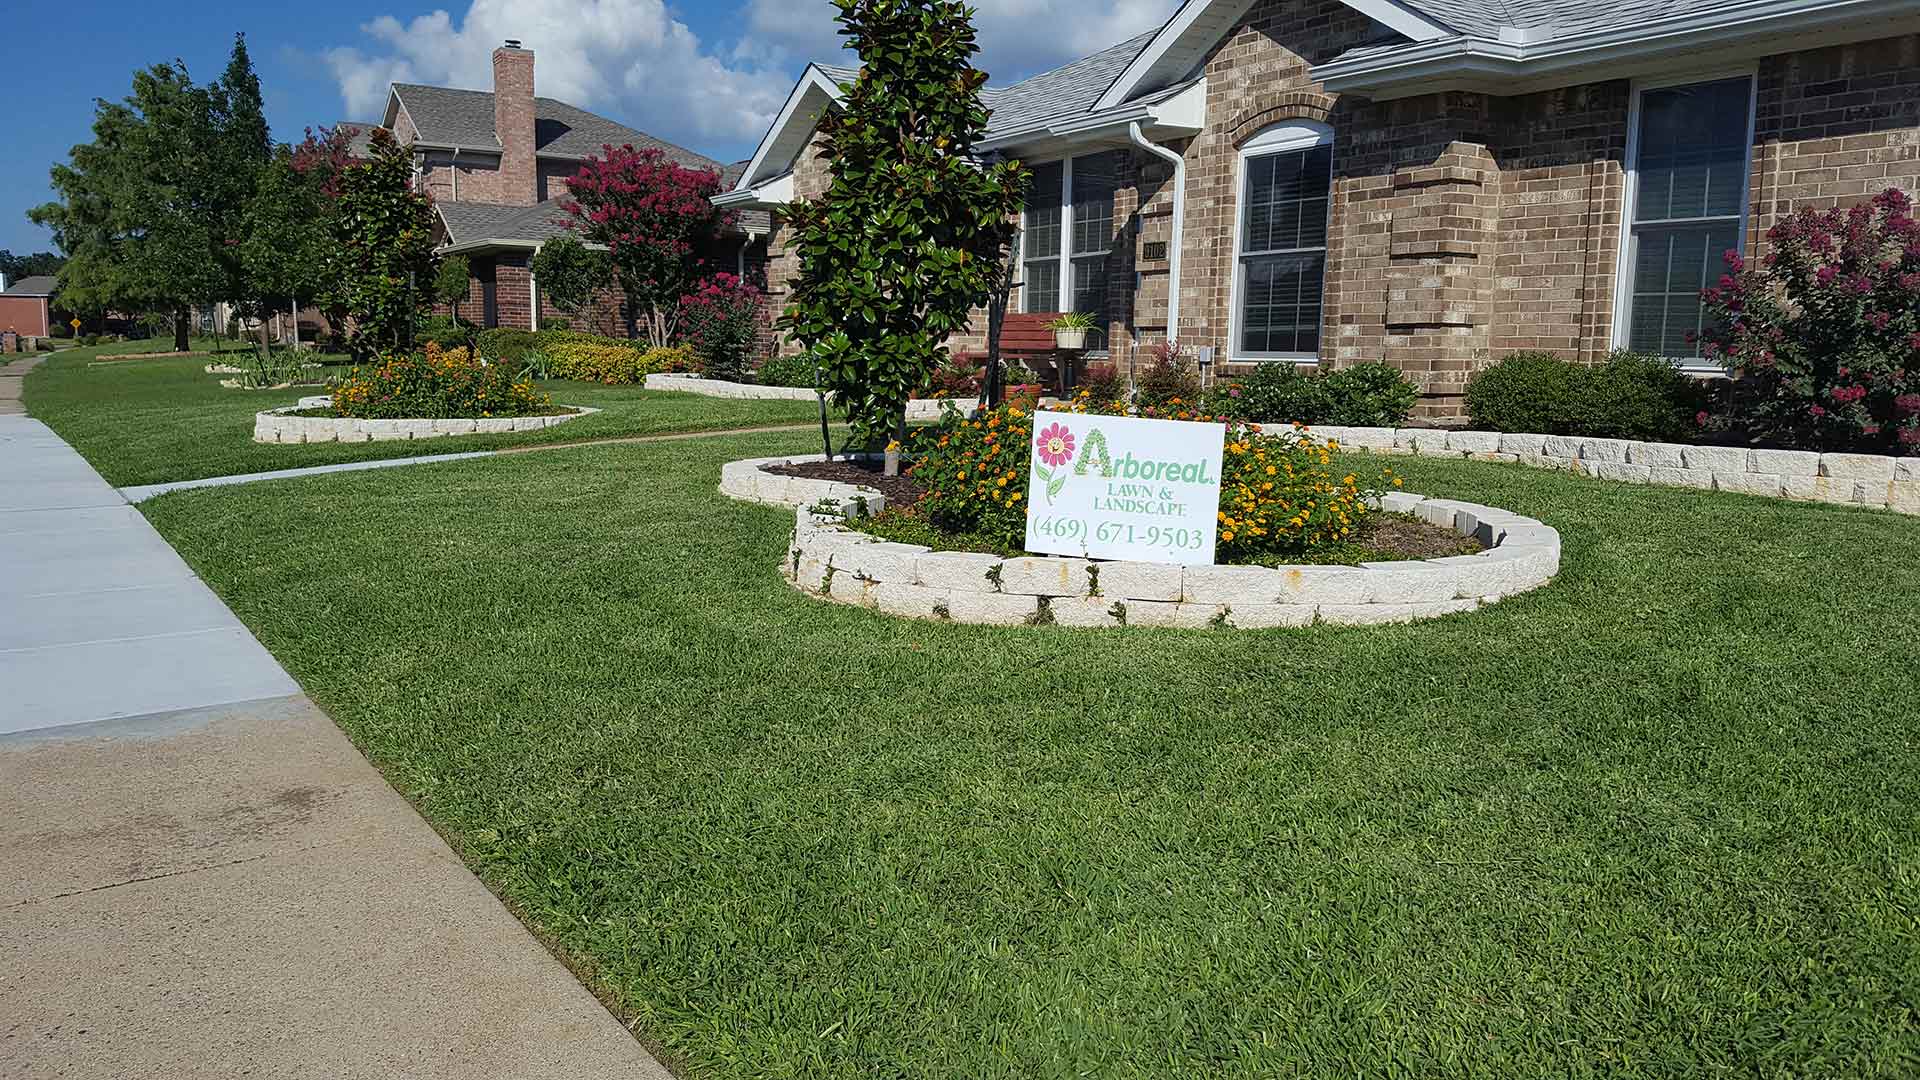 Arboreal signage placed in a maintained lawn bed in Rockwall, TX.